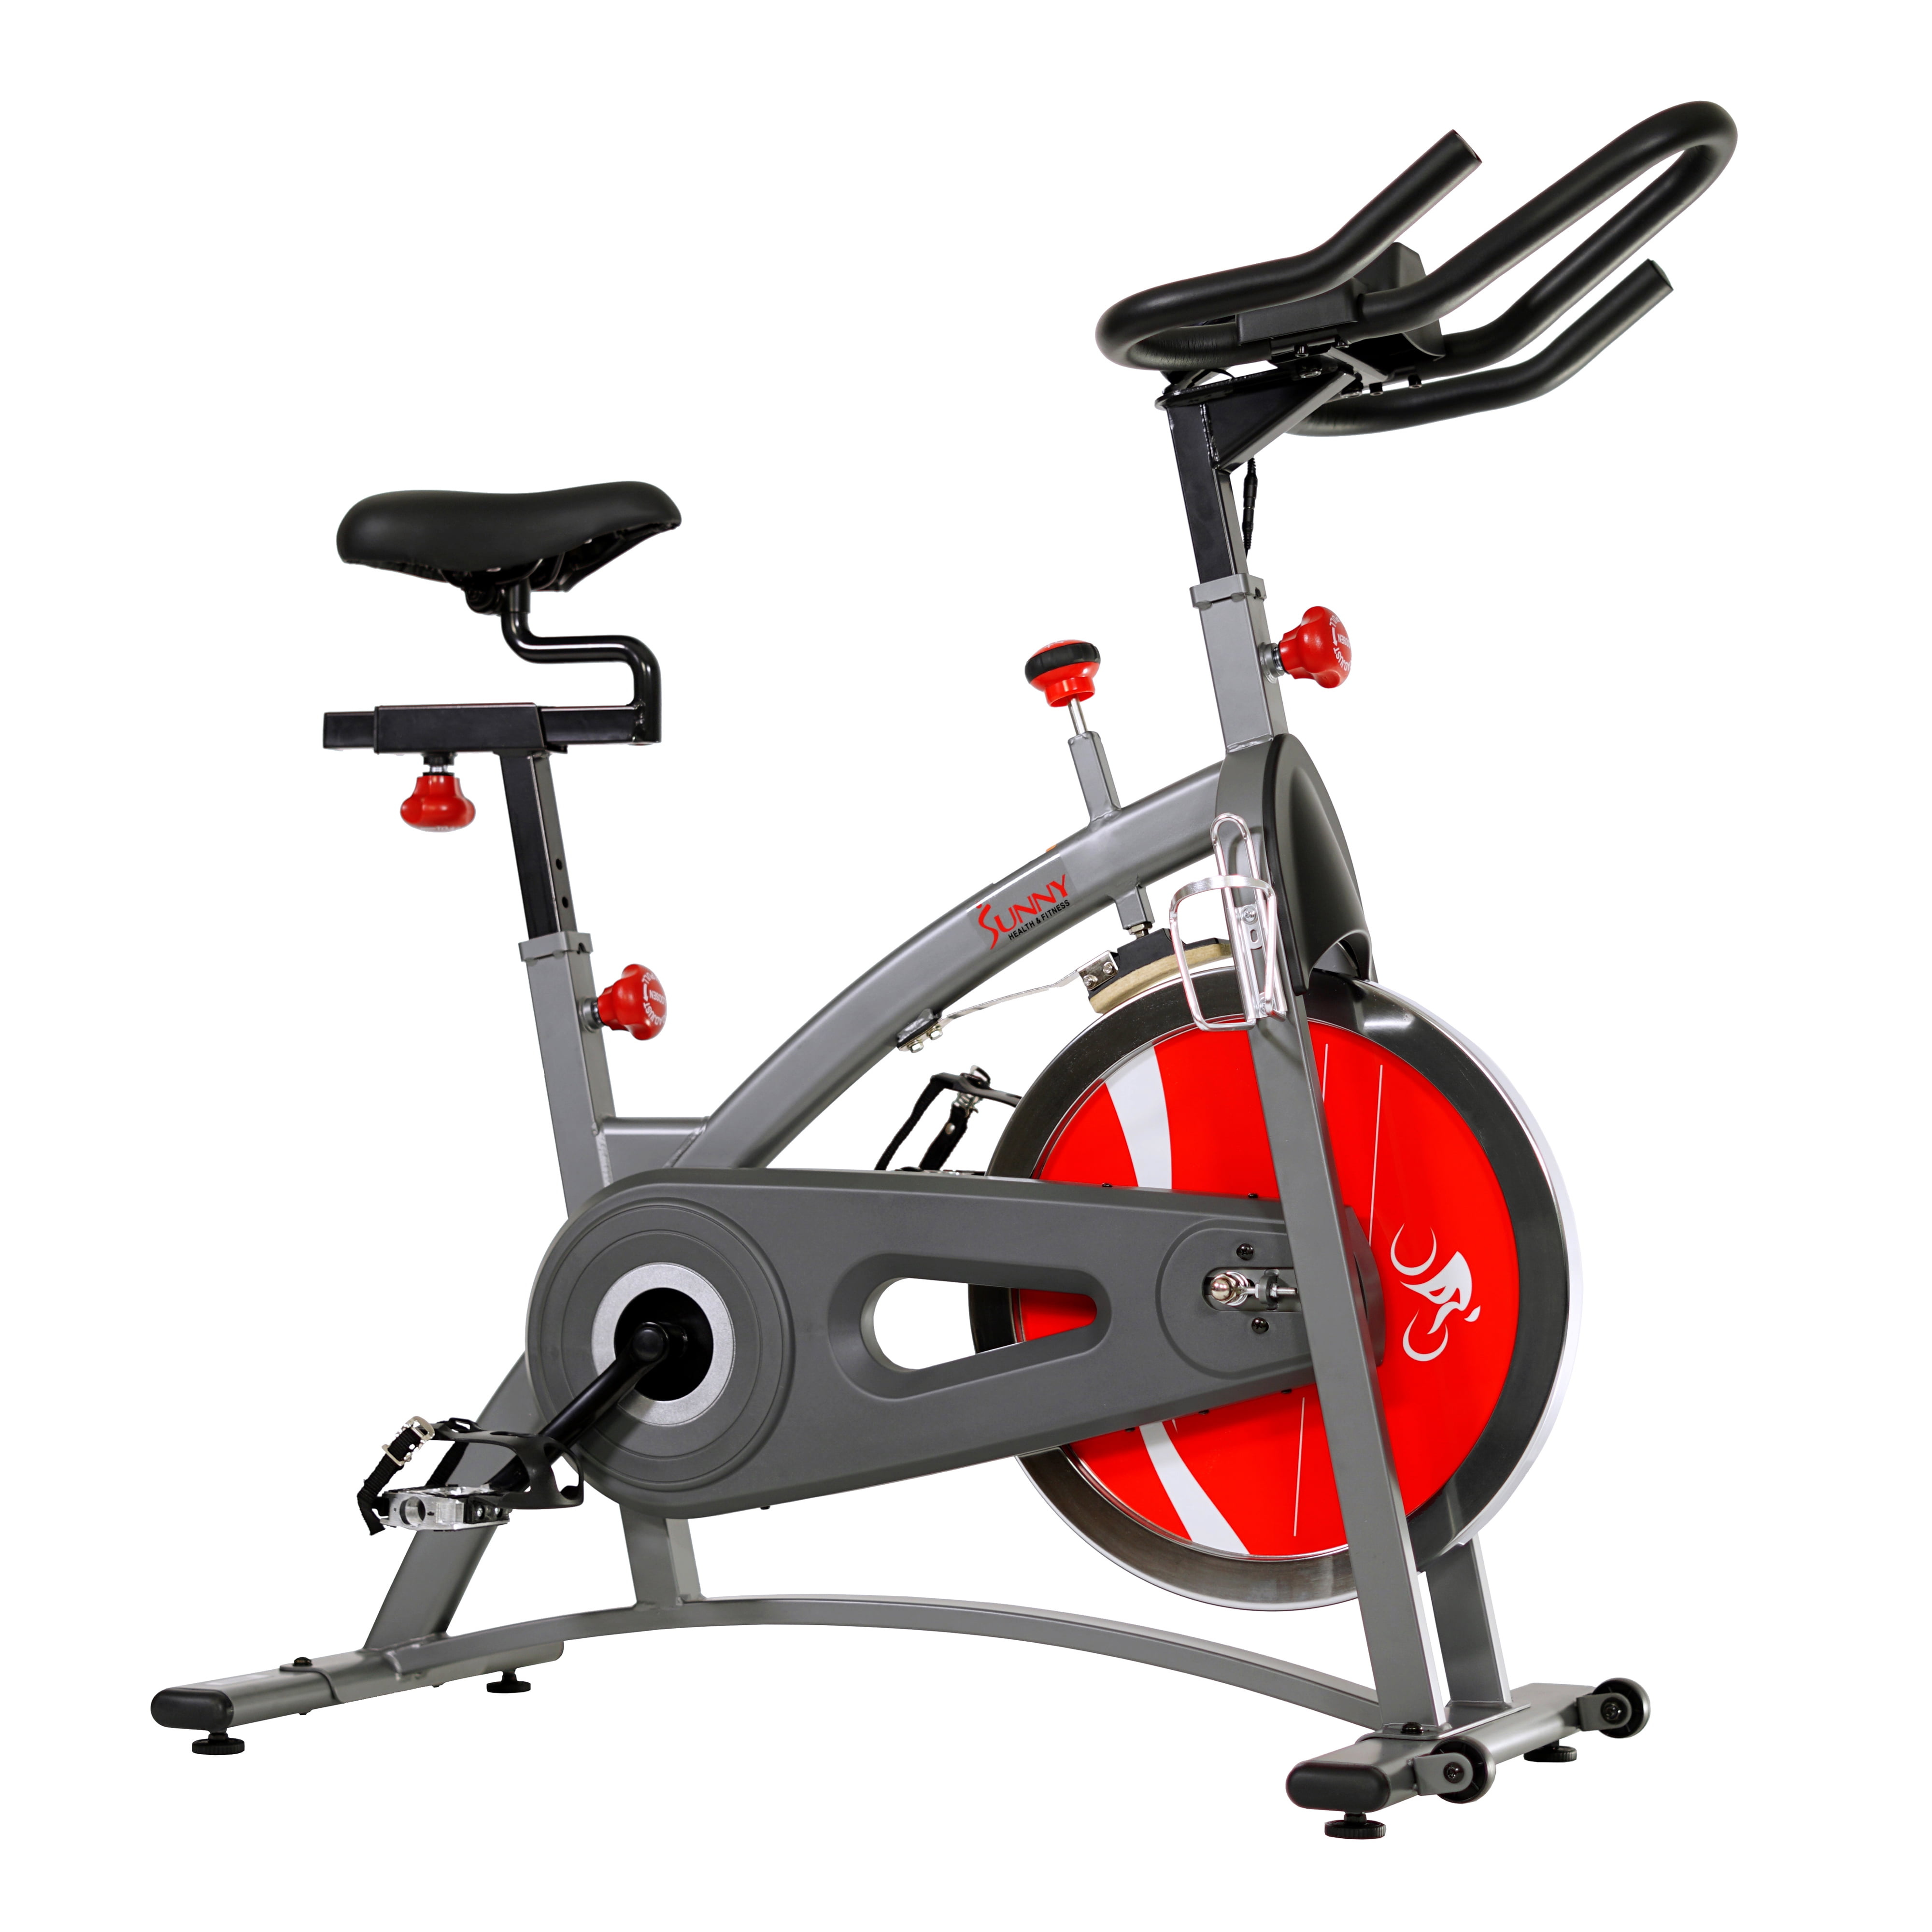 Home Gym Portable Upright Stationary Belt Exercise Fitness Bike Cycle Bicycle 